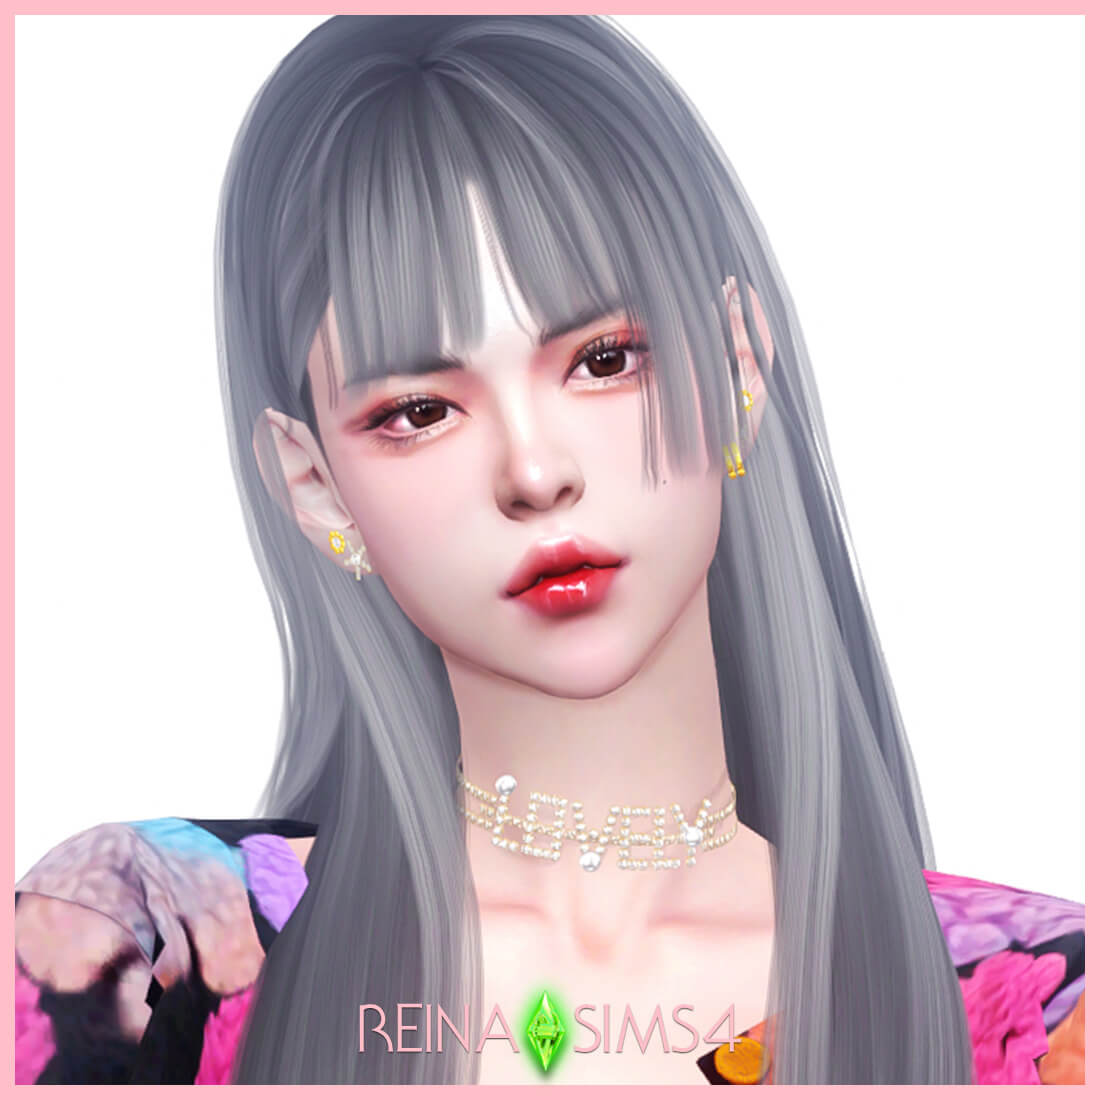 The Sims 4 reinats4hime cutlong version new mesh all | The Sims Book